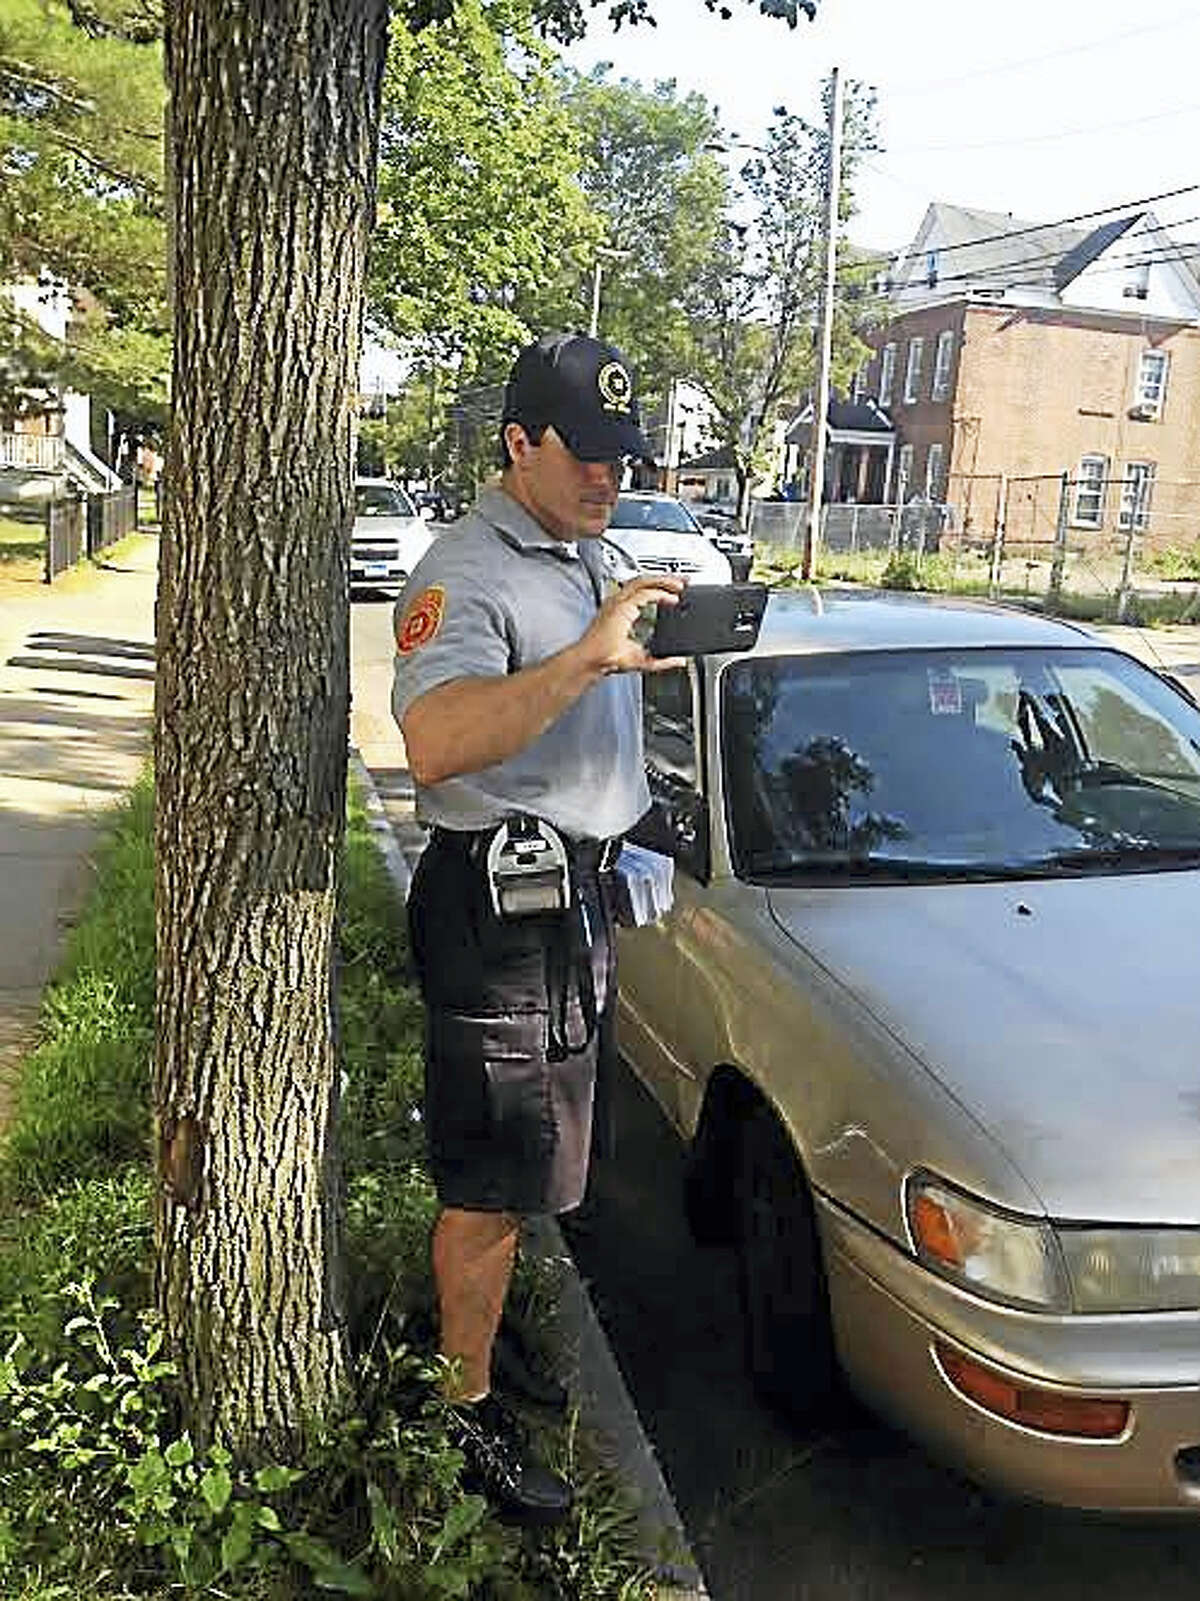 MARY O'LEARY - NEW HAVEN REGISTERParking enforcement officer Stephen Saladino tickets someone parked in a residential zone without a permit.